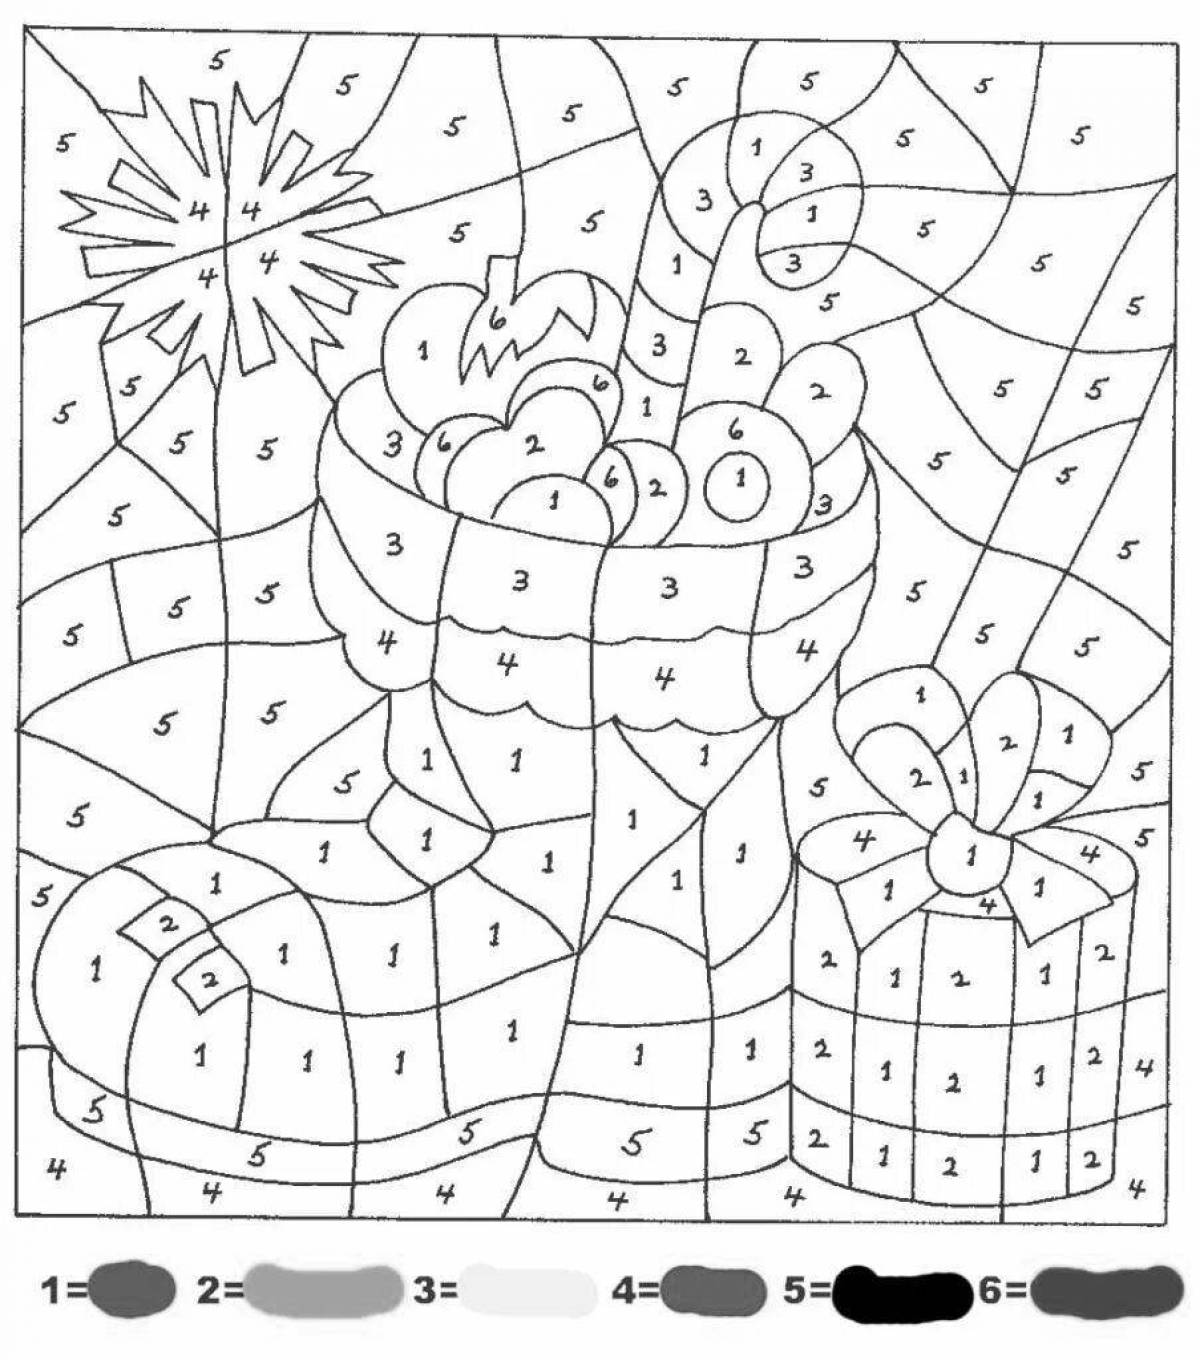 Bright Christmas tree coloring by numbers